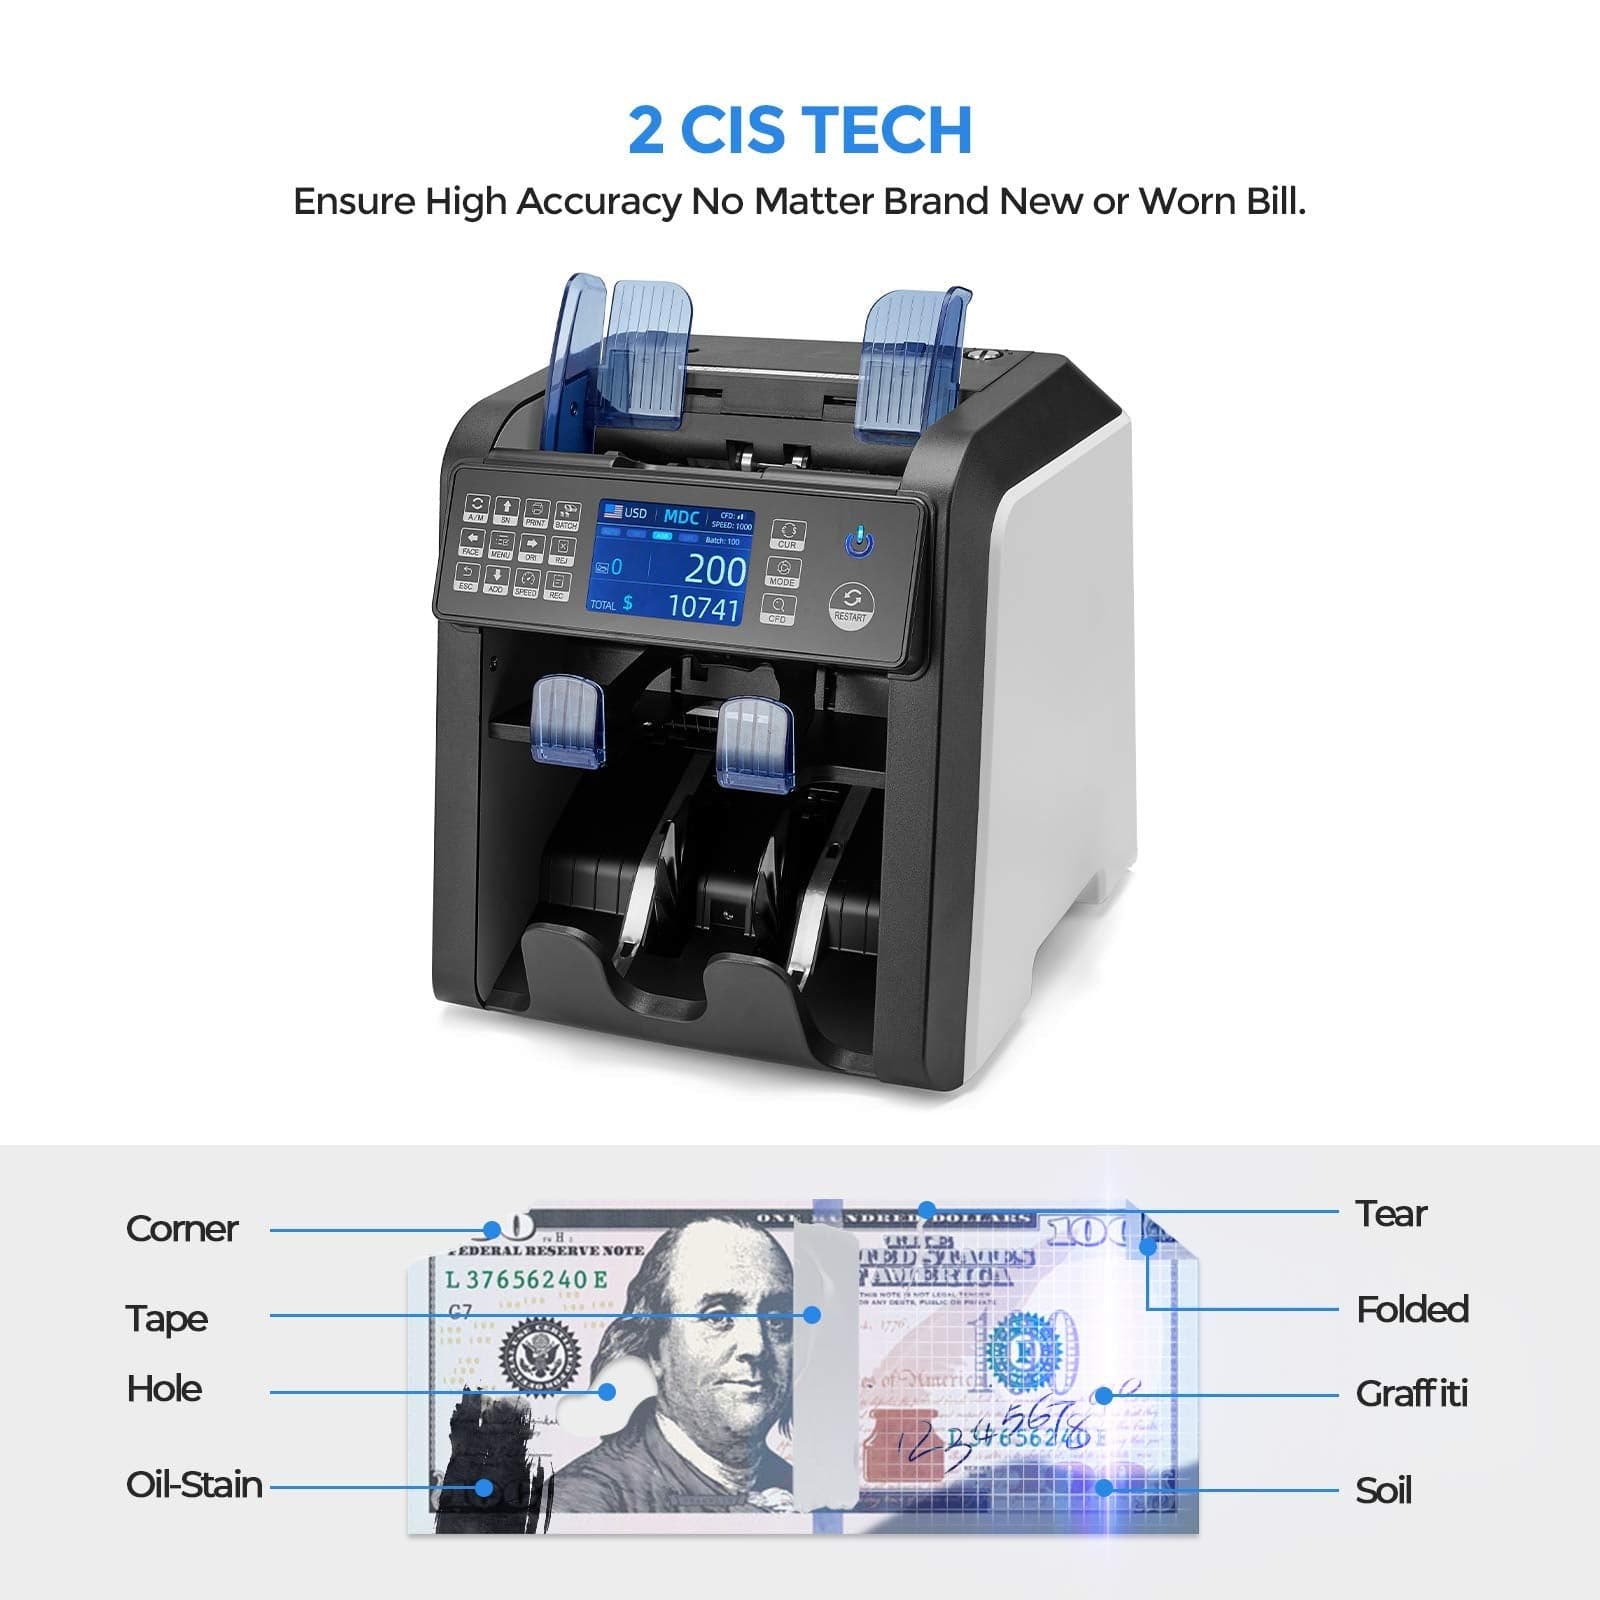 Kolibri Money Counter with UV/MG/IR/DBL/HLF/CHN Counterfeit Detection - Bill Counting Machine - Large LED Display - 1,500 Bills/Min.MUNBYN Mixed Denomination Bill Counter Sorter with Value Counting, 2 Pocket for Sorting, IMC08. 2 CIS Tech. Ensure high accurace no matter brand new or worn bill. 